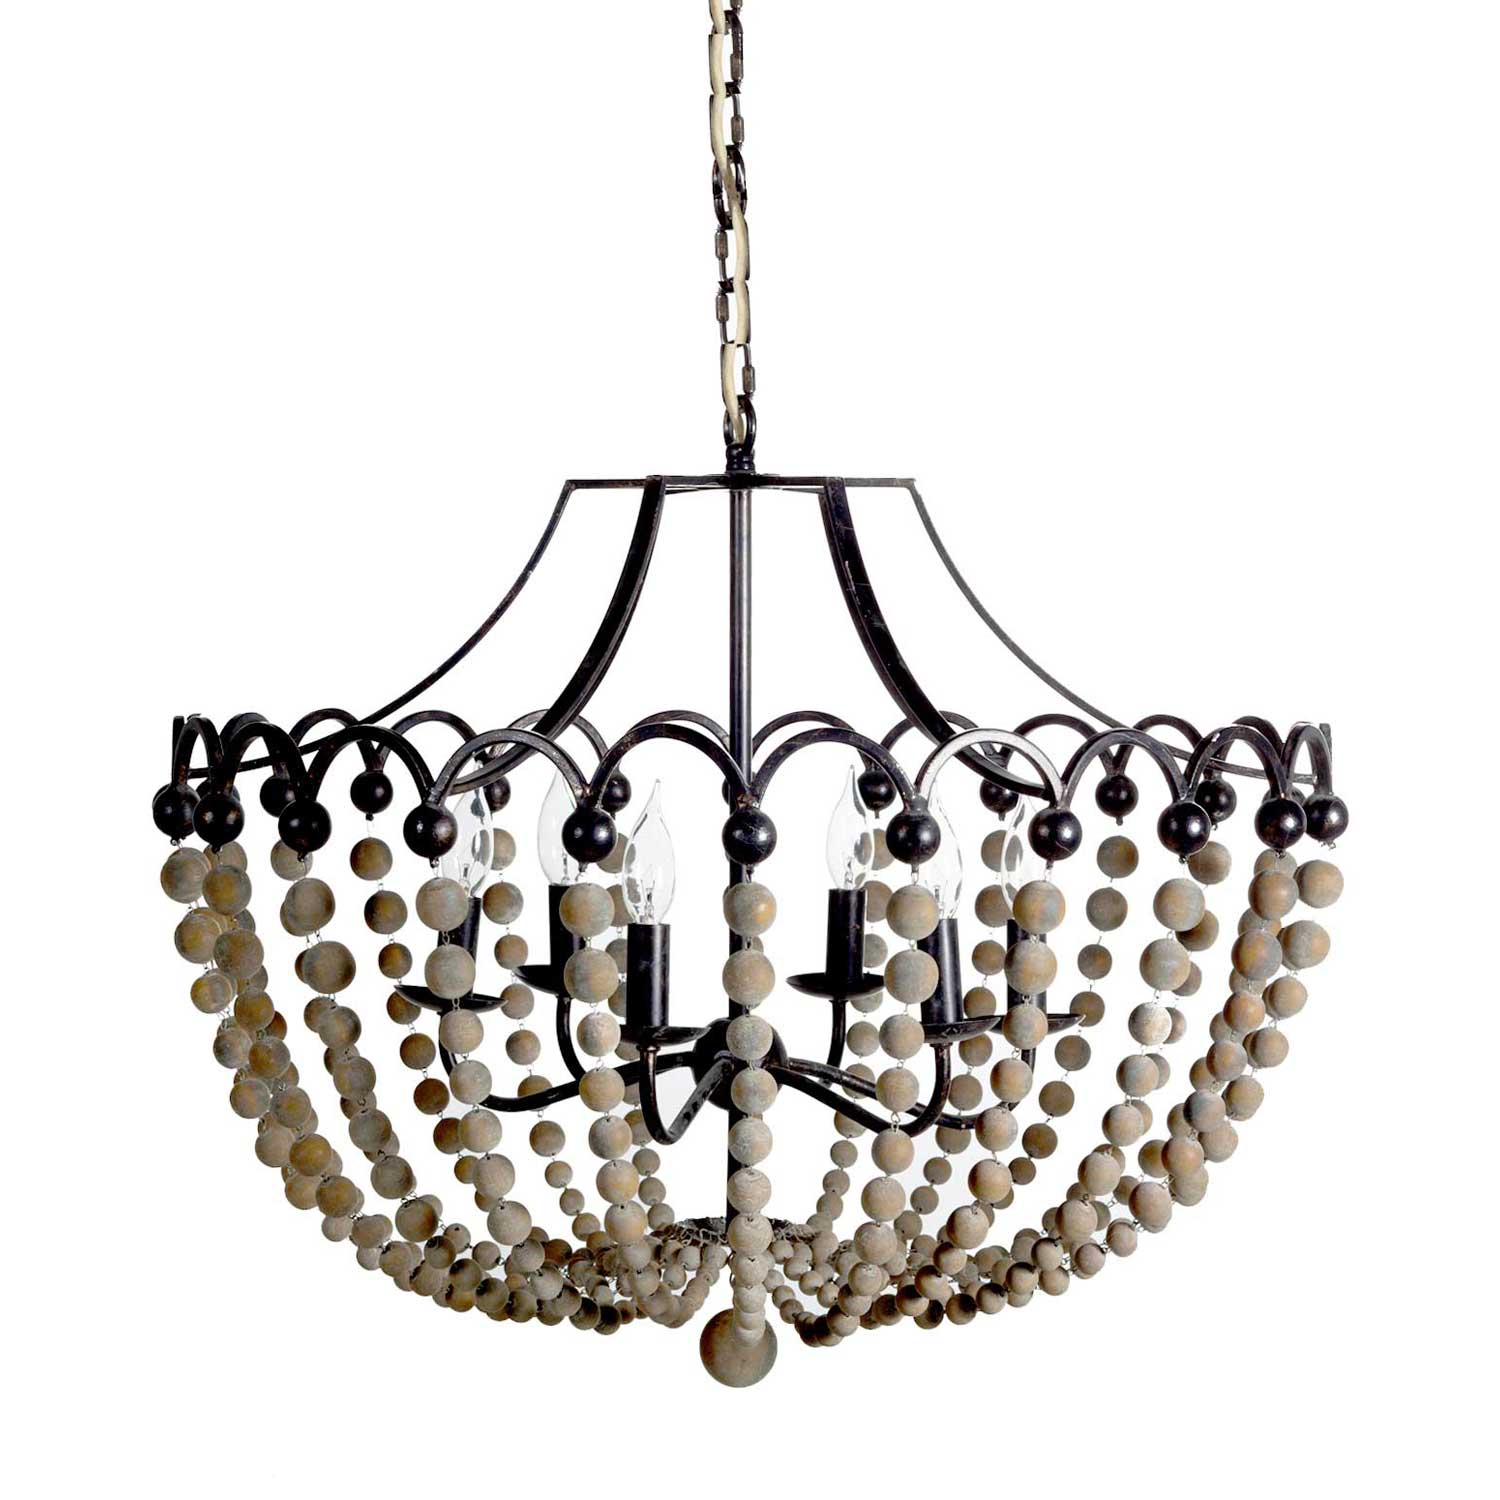 peter chandelier product image